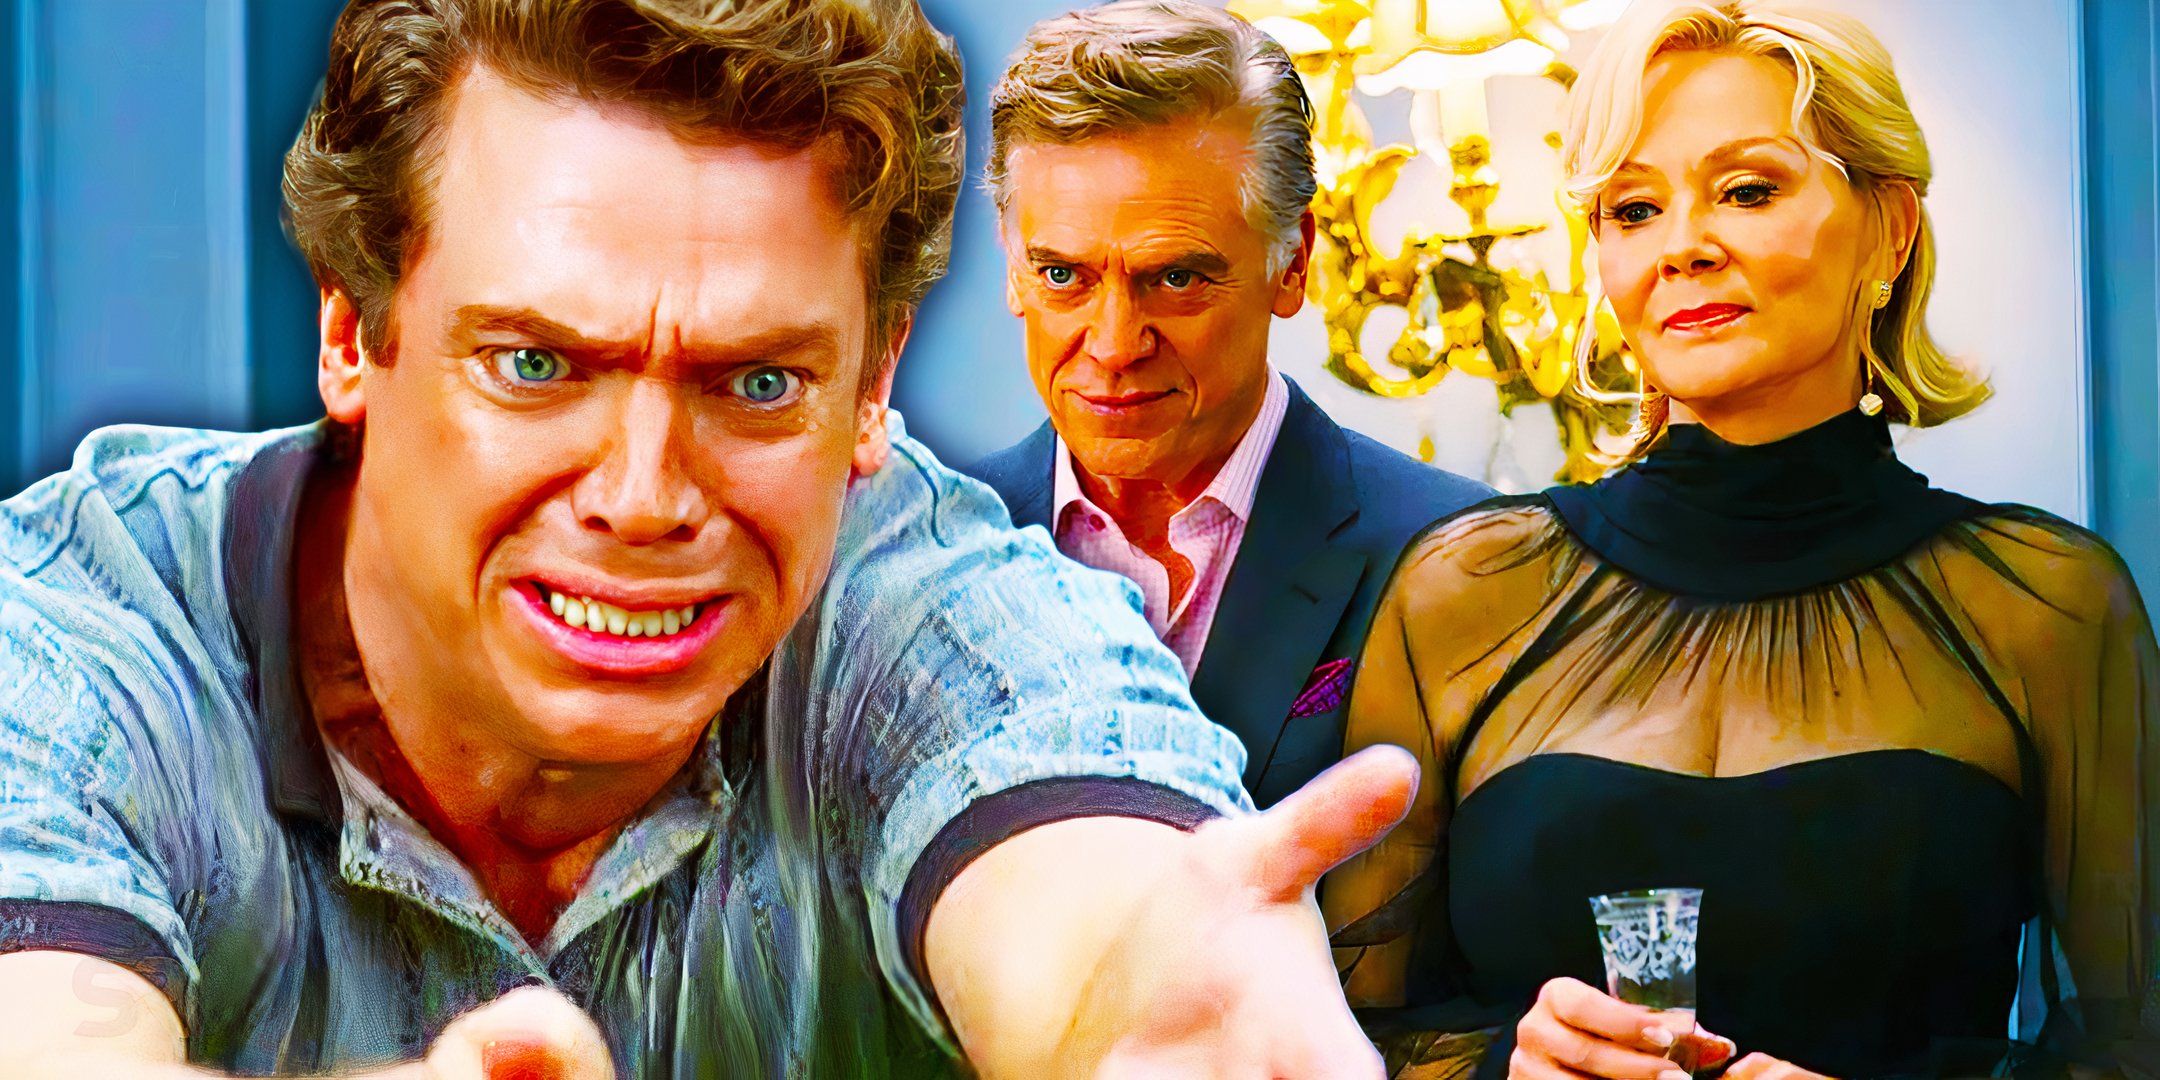 Christopher McDonald as Shooter McGavin in Happy Gilmore with Marty and Deborah in Hacks